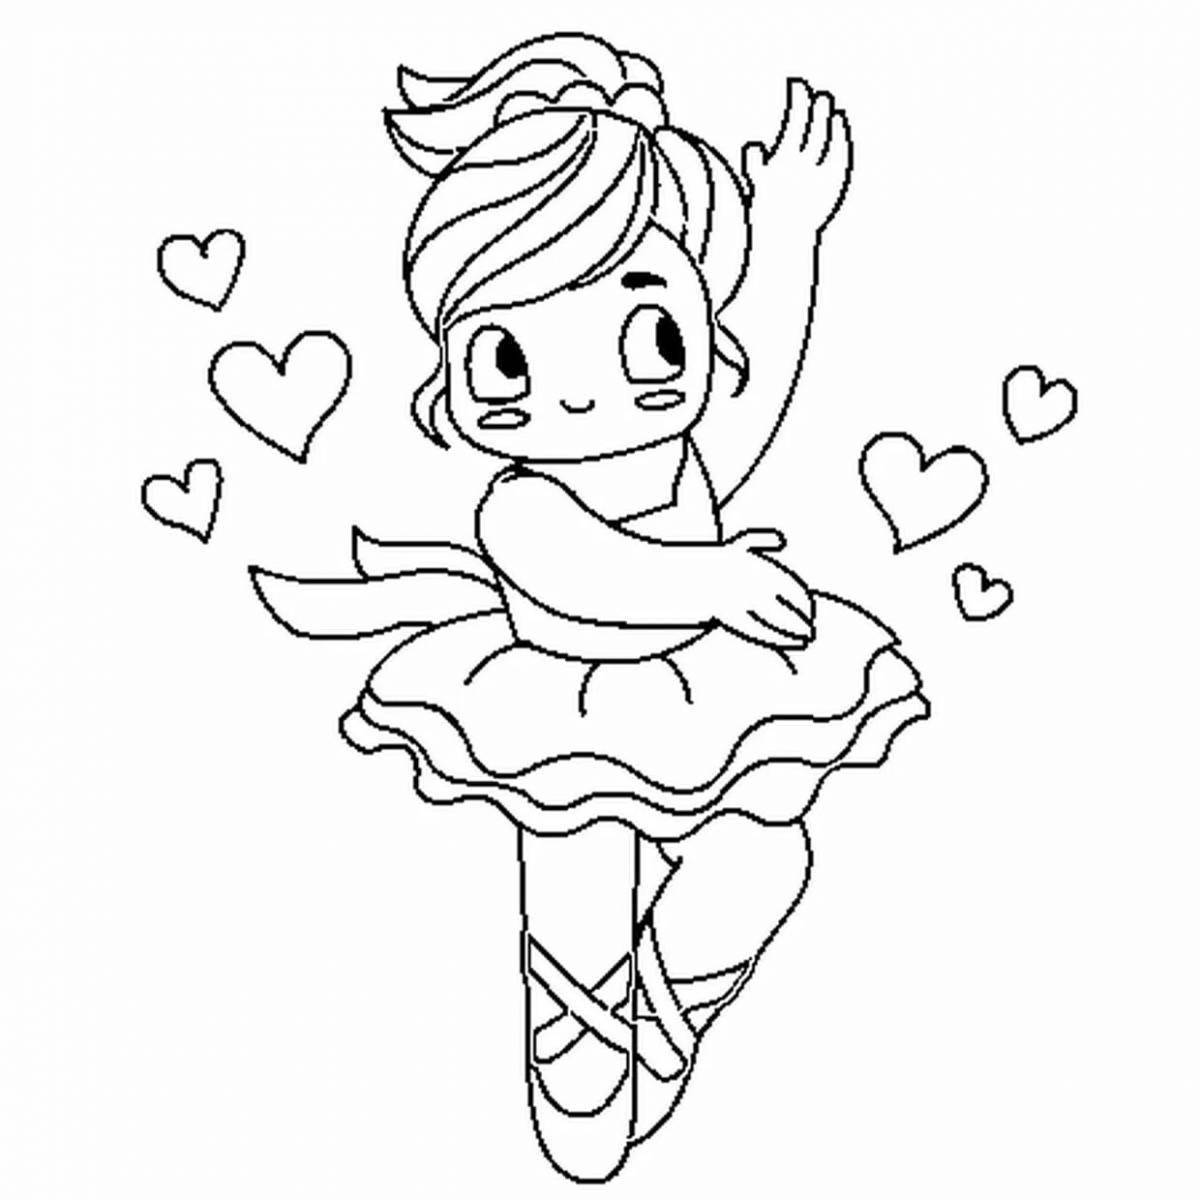 Animated dancing girl coloring page